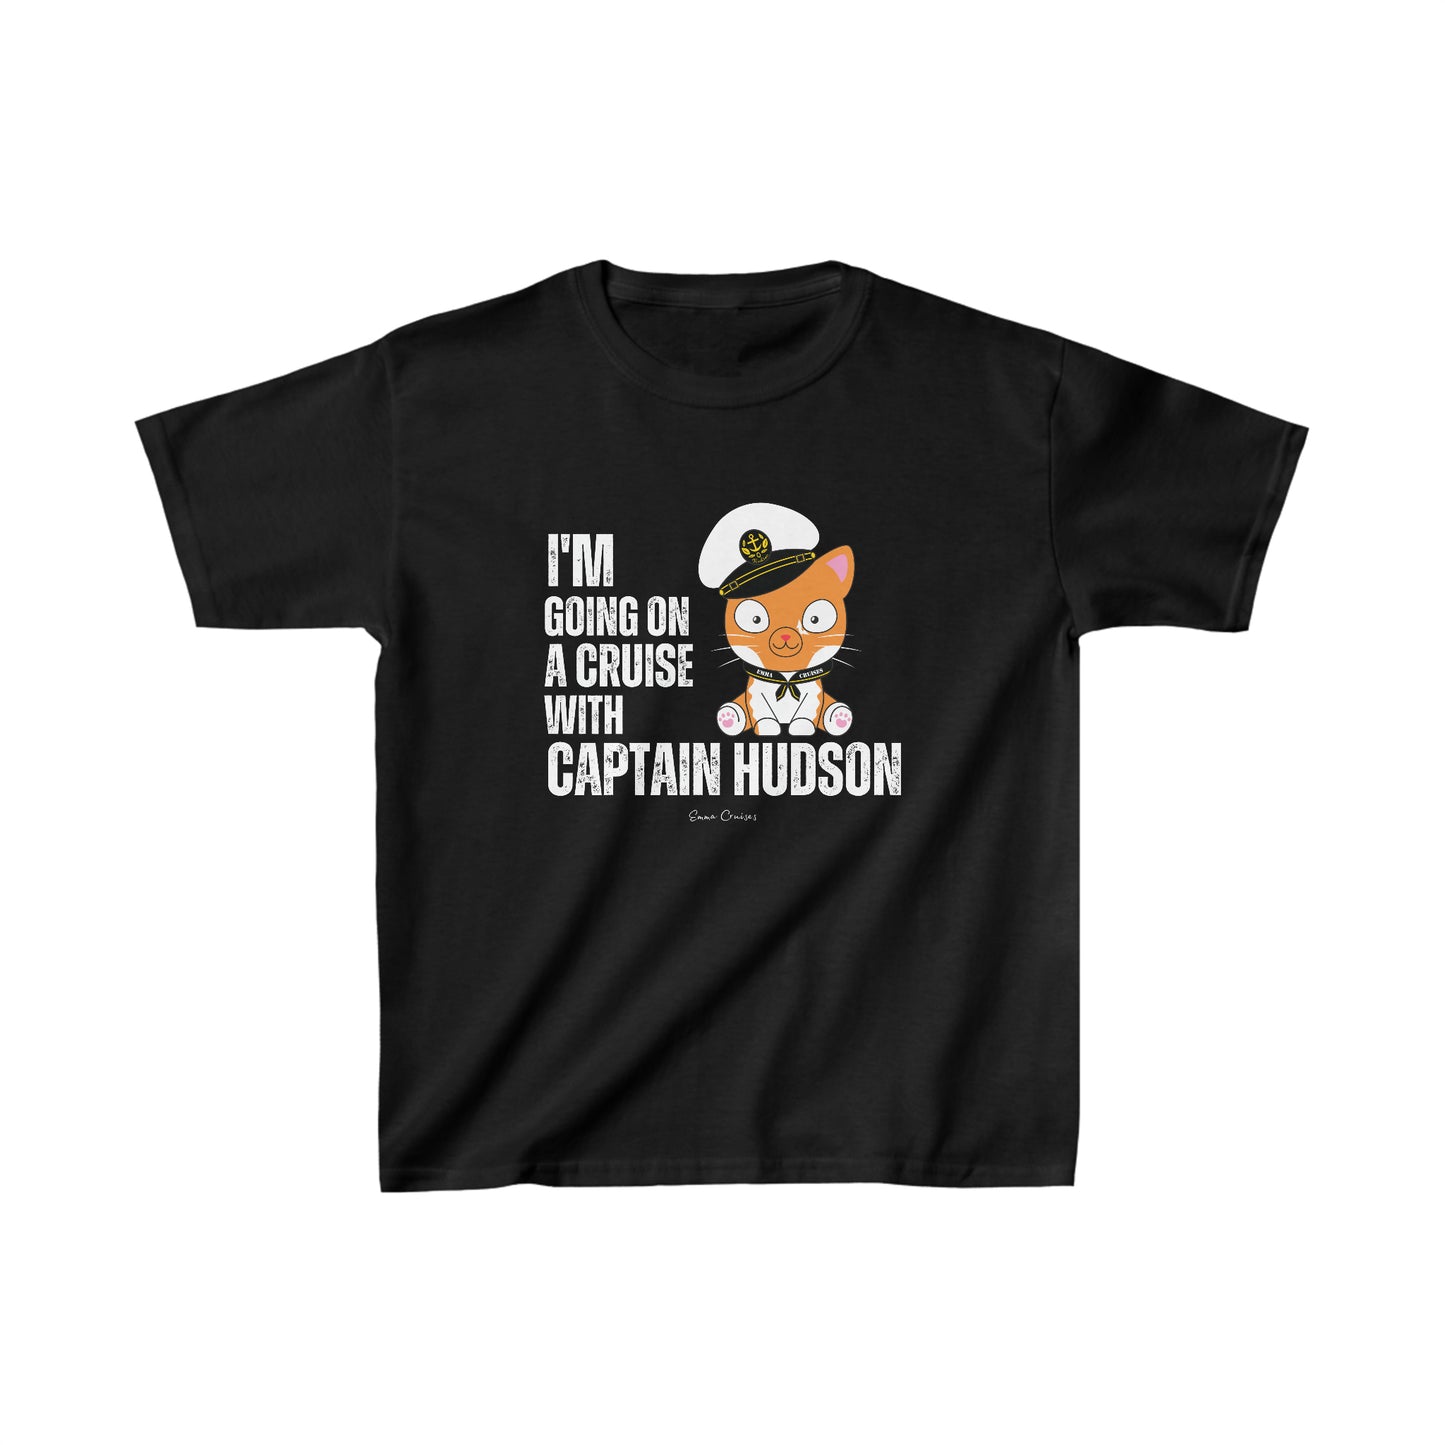 I'm Going on a Cruise With Captain Hudson - Kids UNISEX T-Shirt